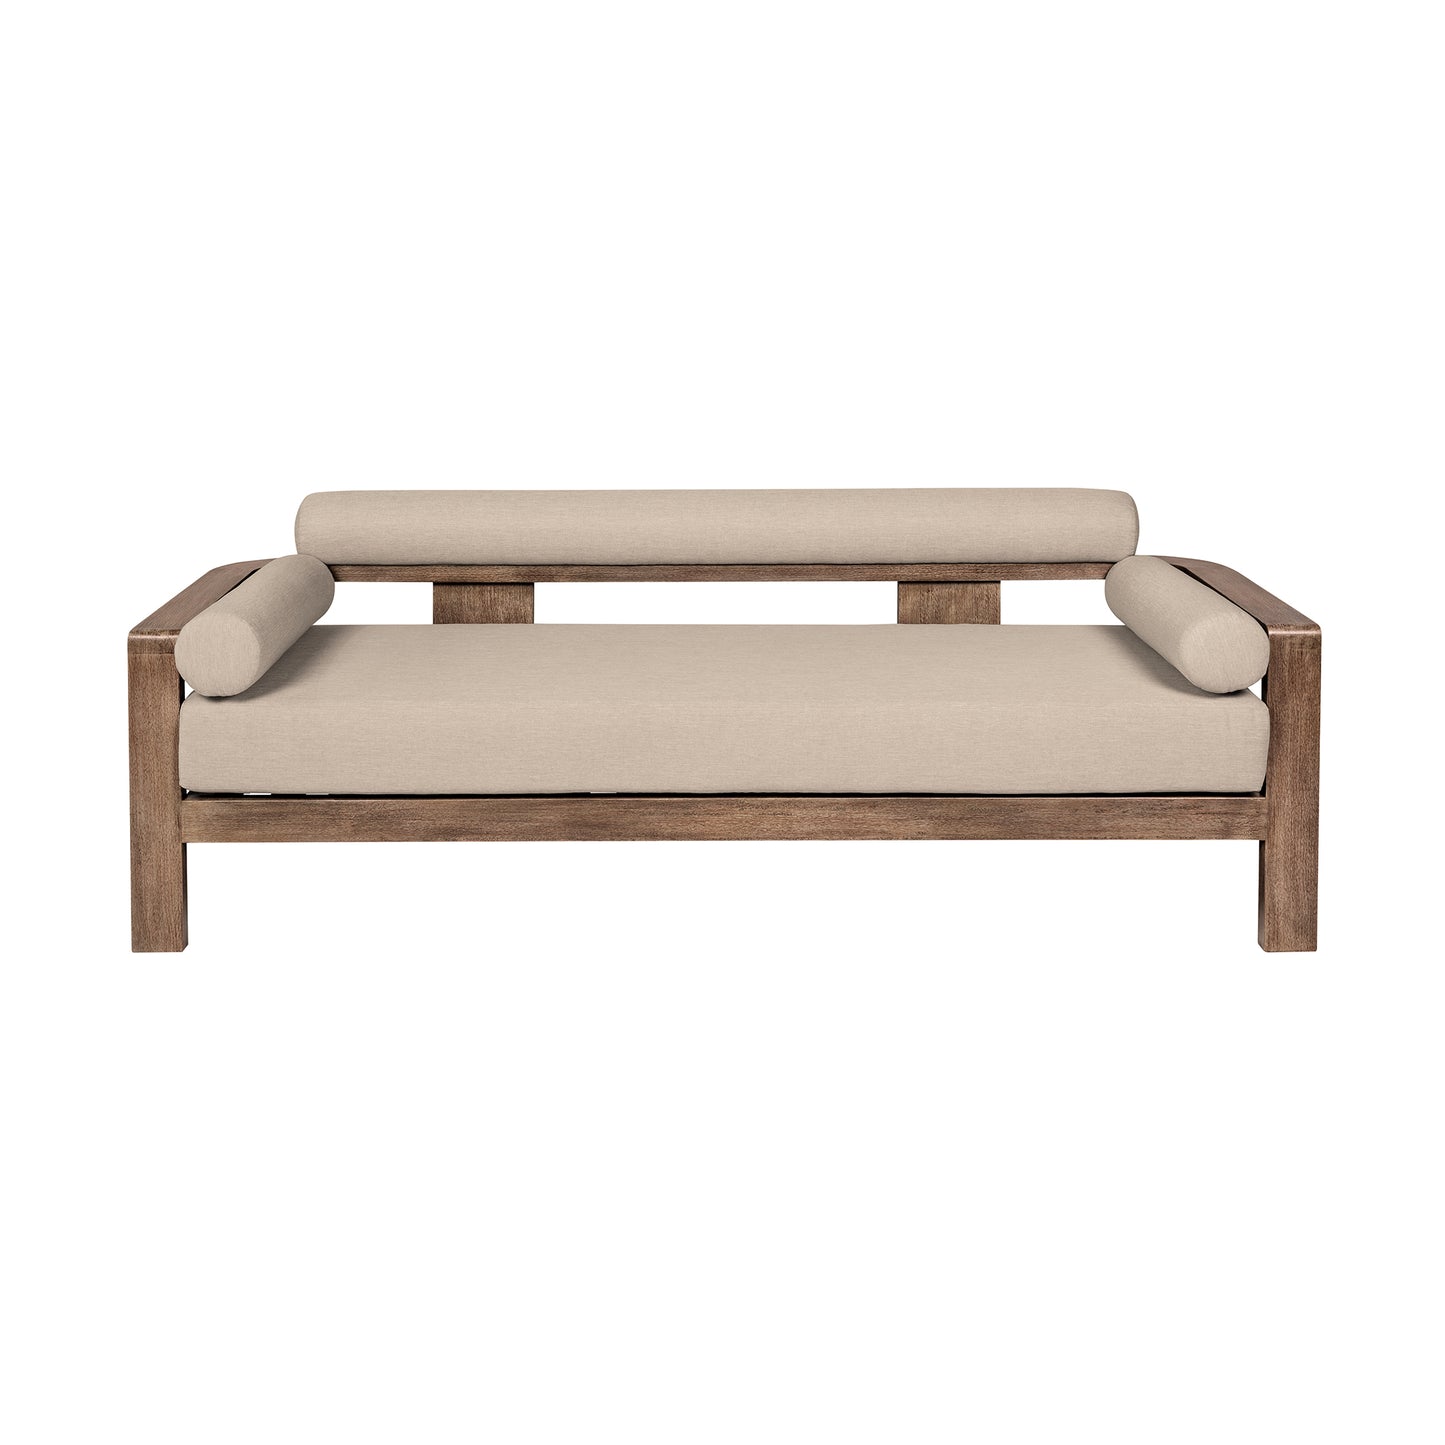 Relic Outdoor Patio Sofa in Weathered Eucalyptus Wood with Taupe Olefin Cushions